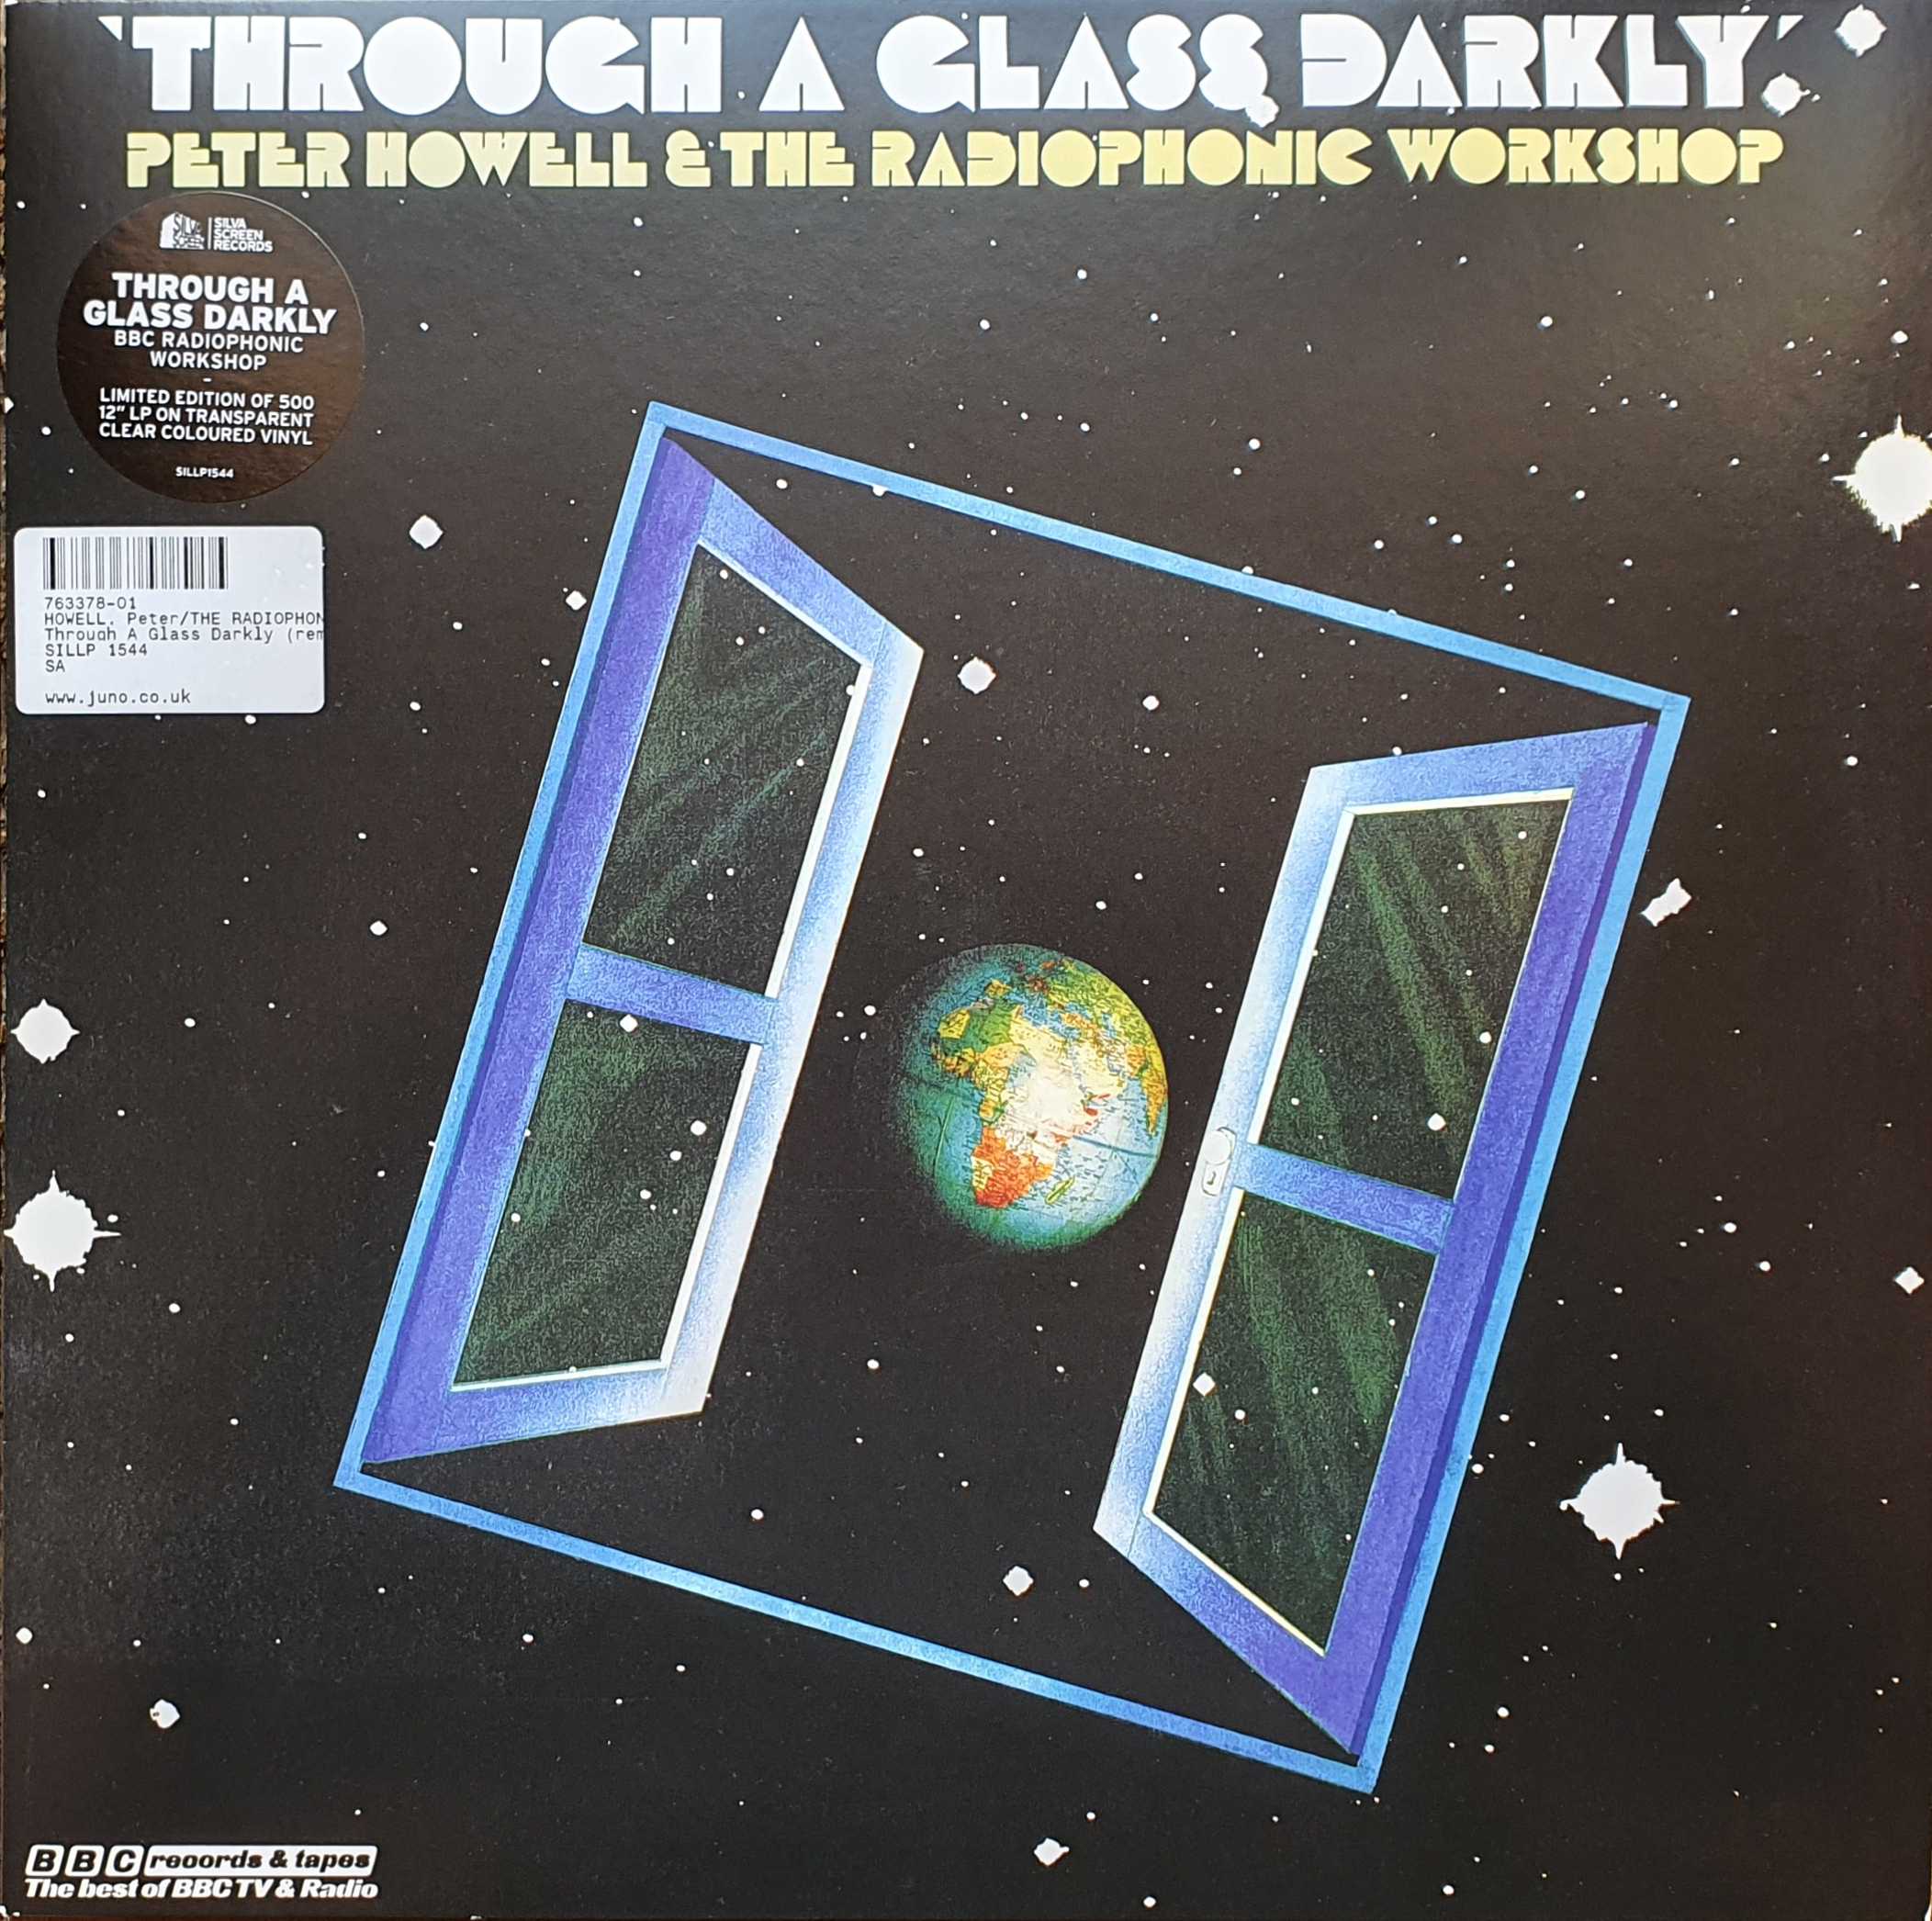 Picture of Through a glass darkly by artist Peter Howell and the BBC Radiophonic Workshop from the BBC albums - Records and Tapes library